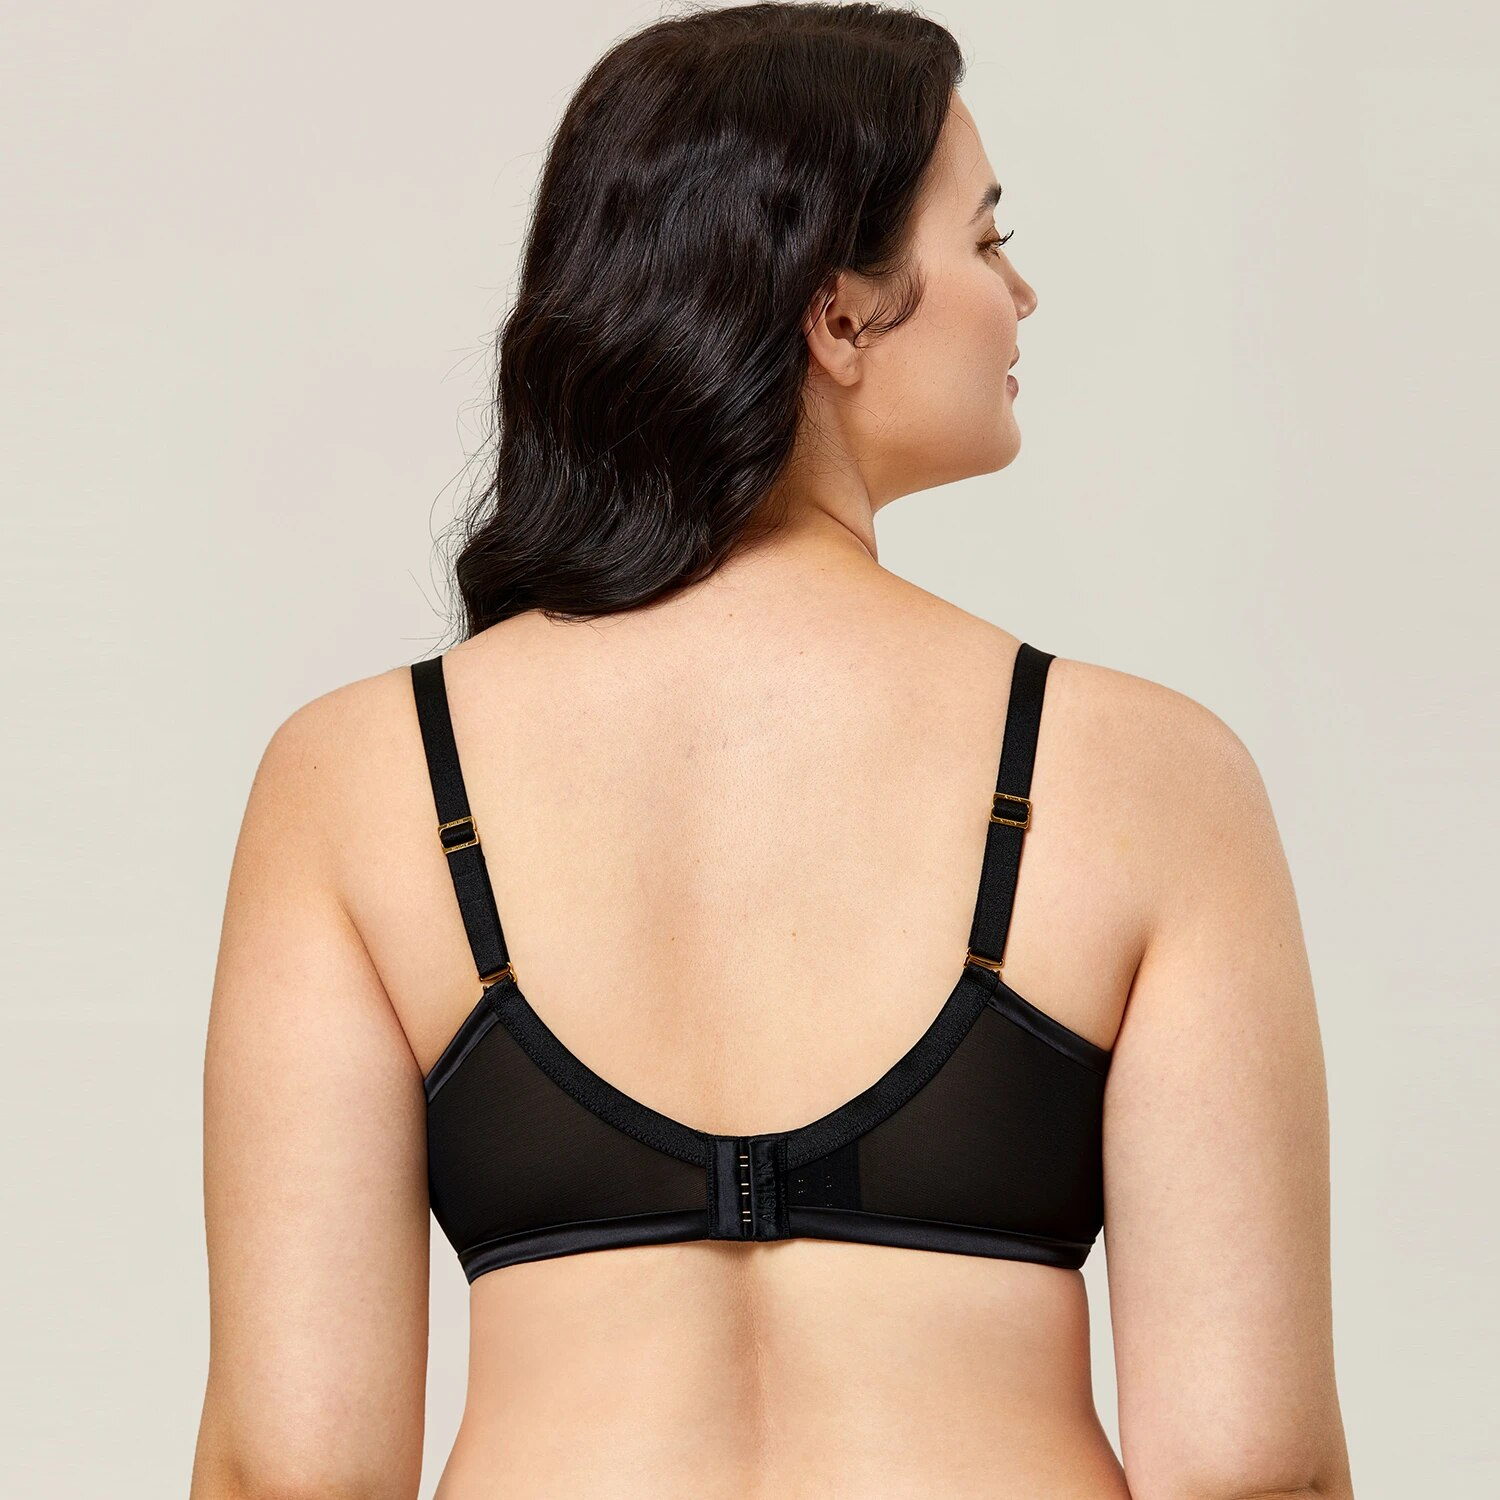 Underwire support lace bra for a feminine appearance – MissFine